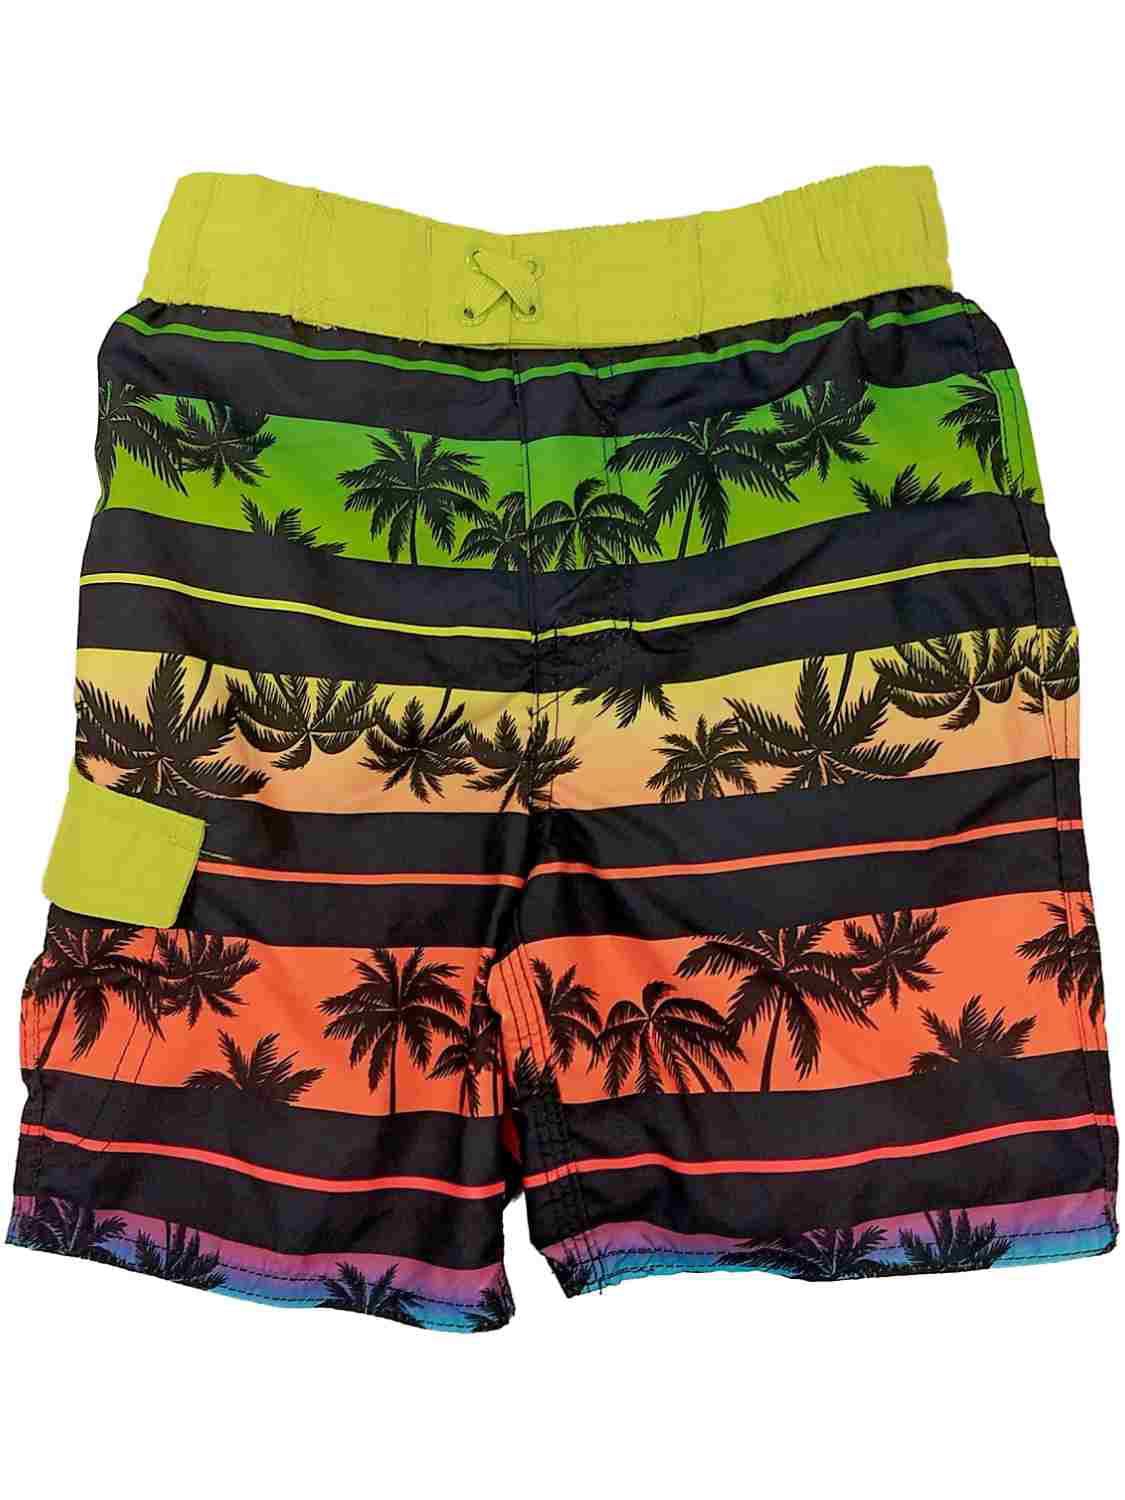 Depuge Tropical Palm Leaves Boy Swim Trunks Board Quick Dry Beach Shorts with Pocket 